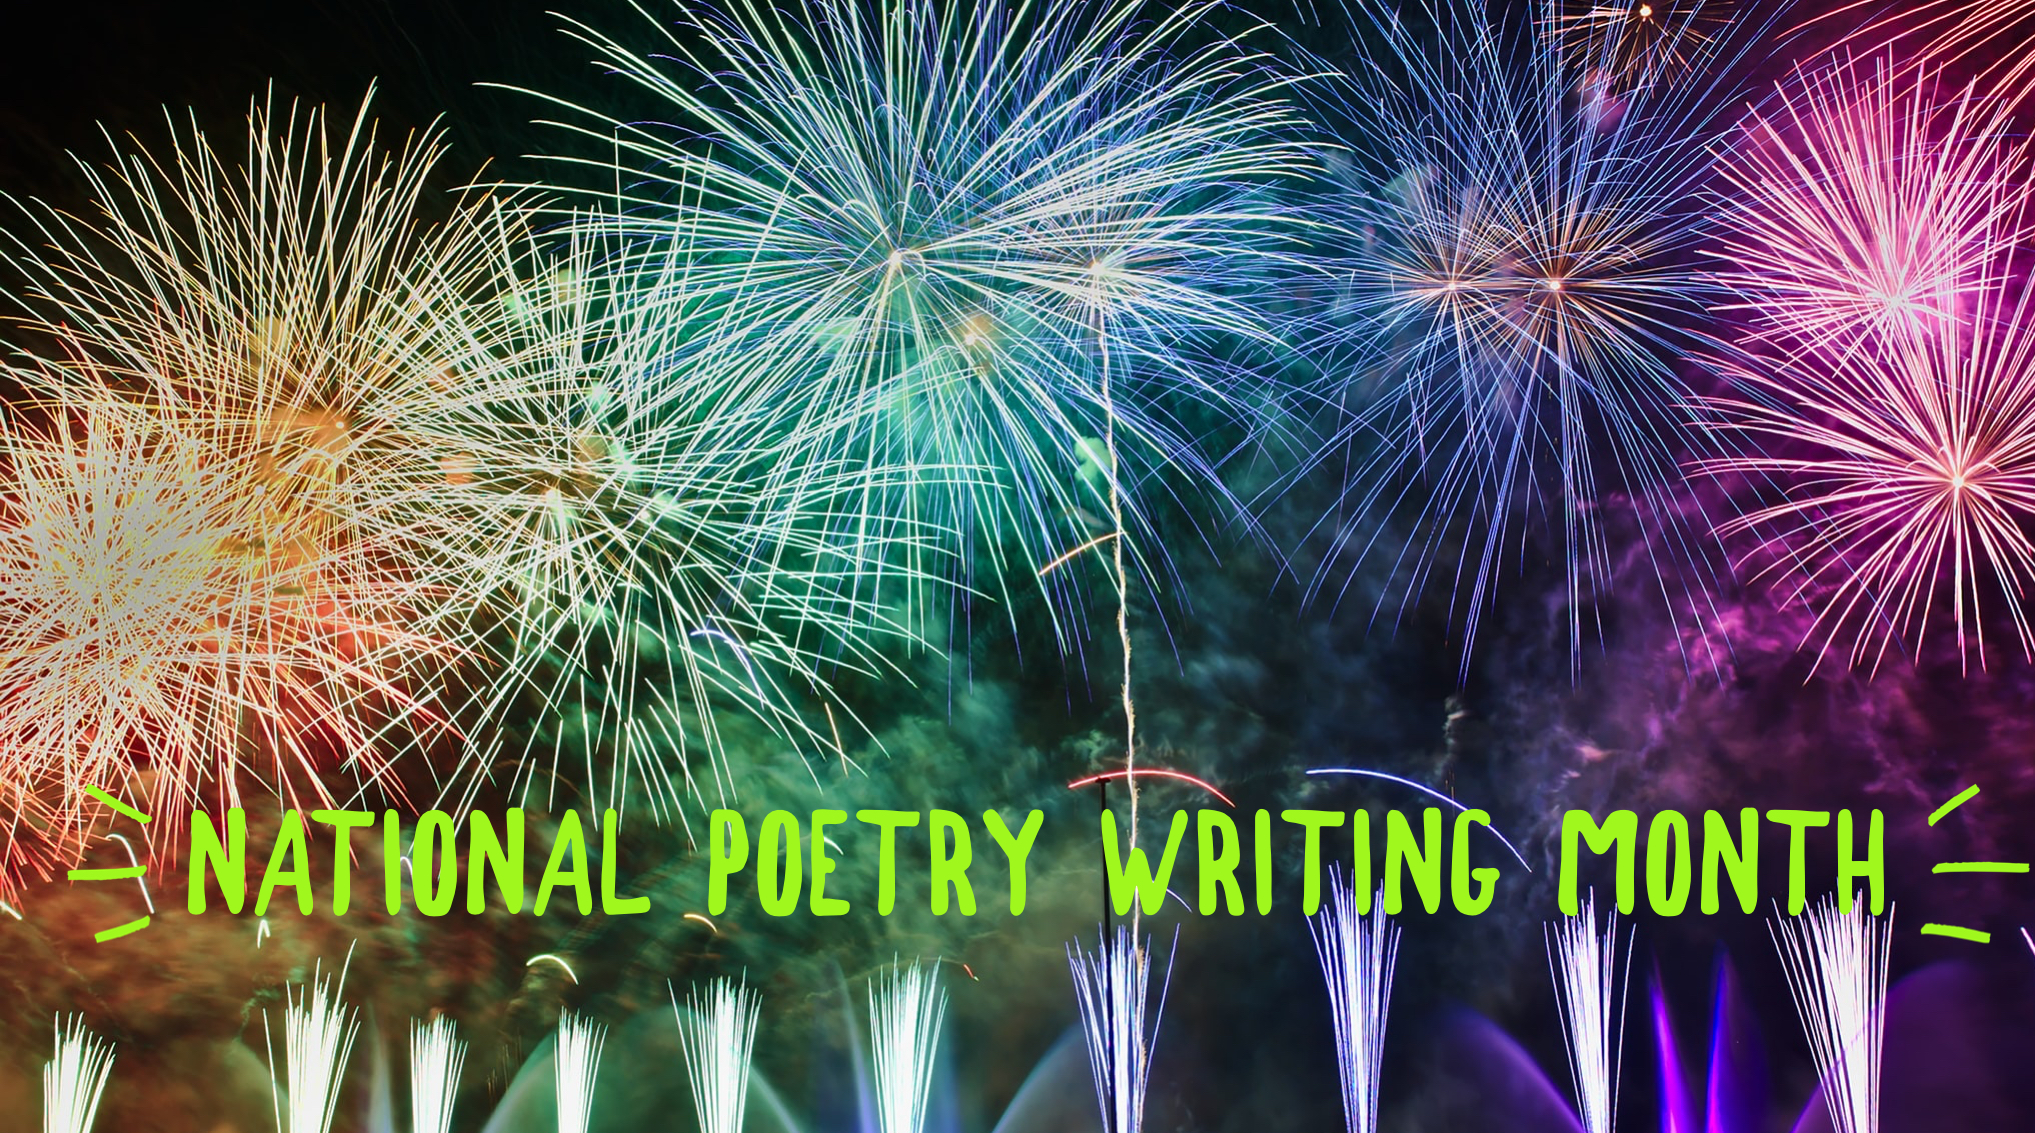 National Poetry Writing Month